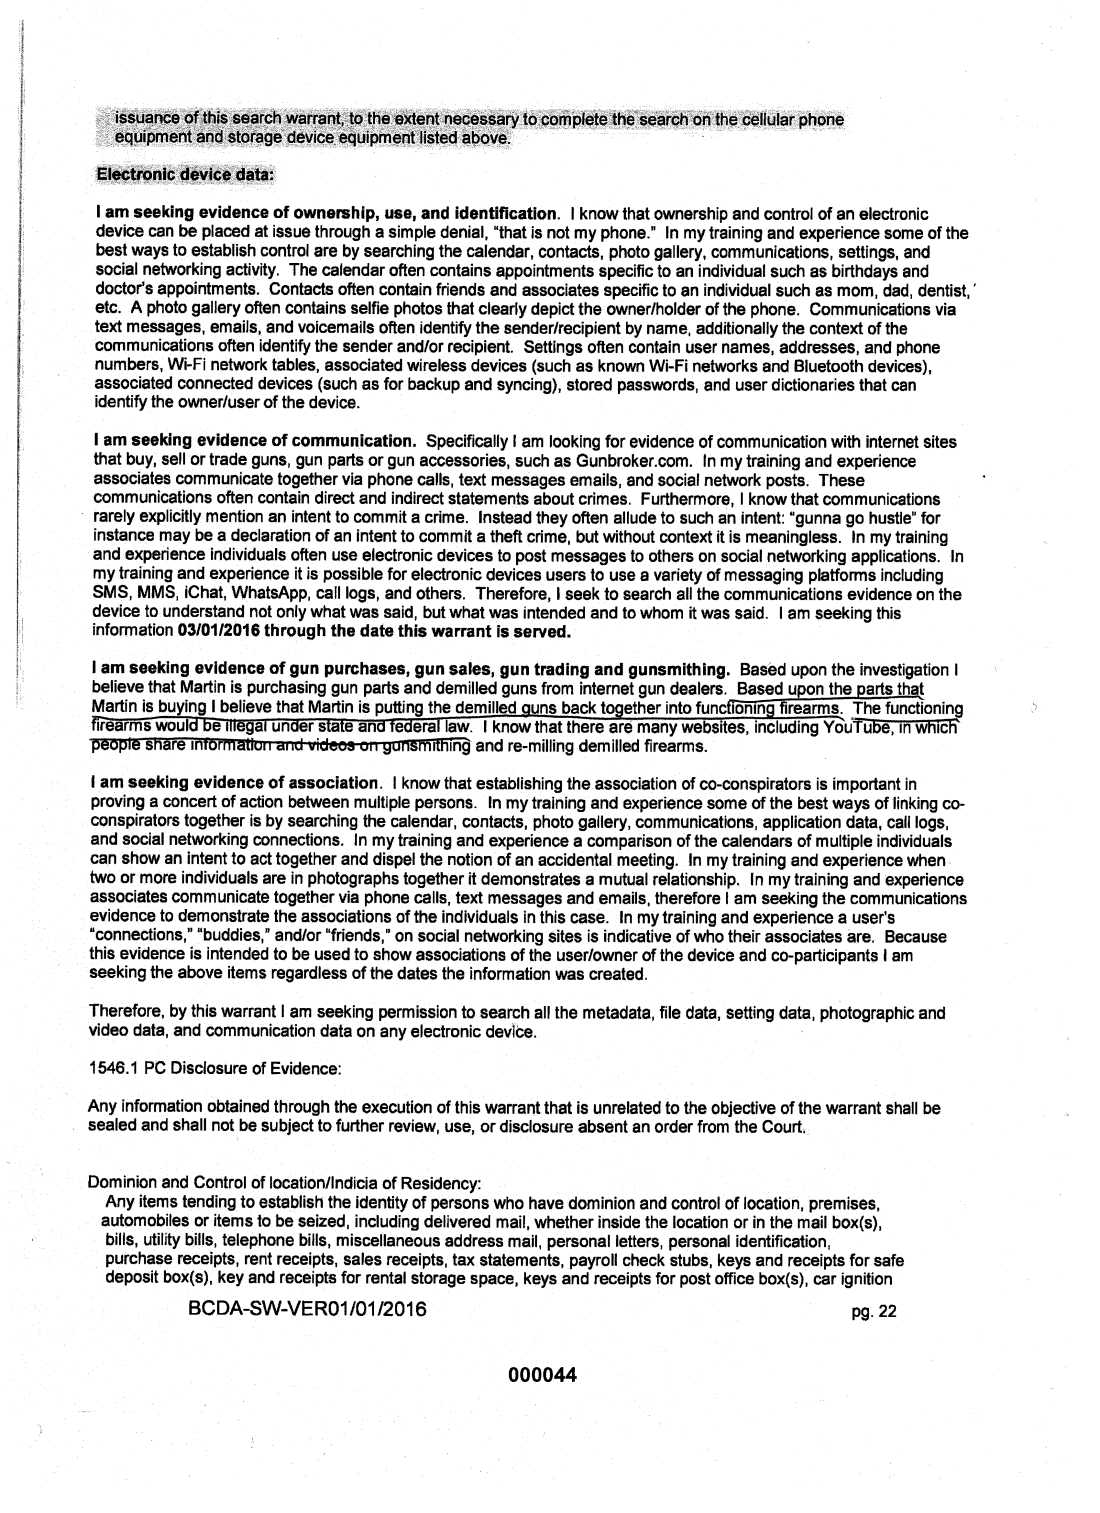 Statement of probable cause page 18